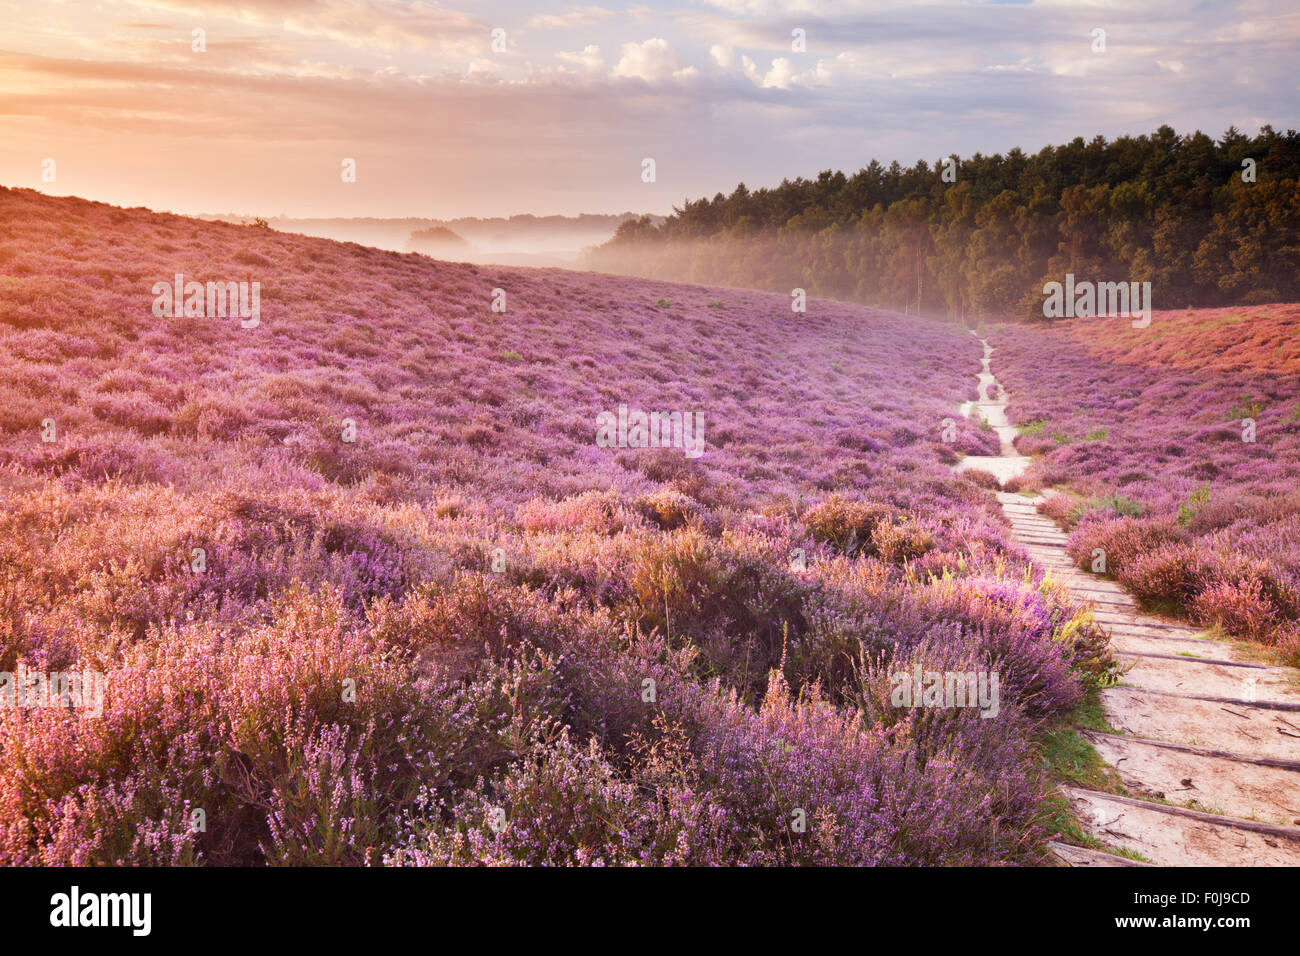 A path through endless hills with blooming heather at sunrise. Photographed at the Posbank in The Netherlands. Stock Photo